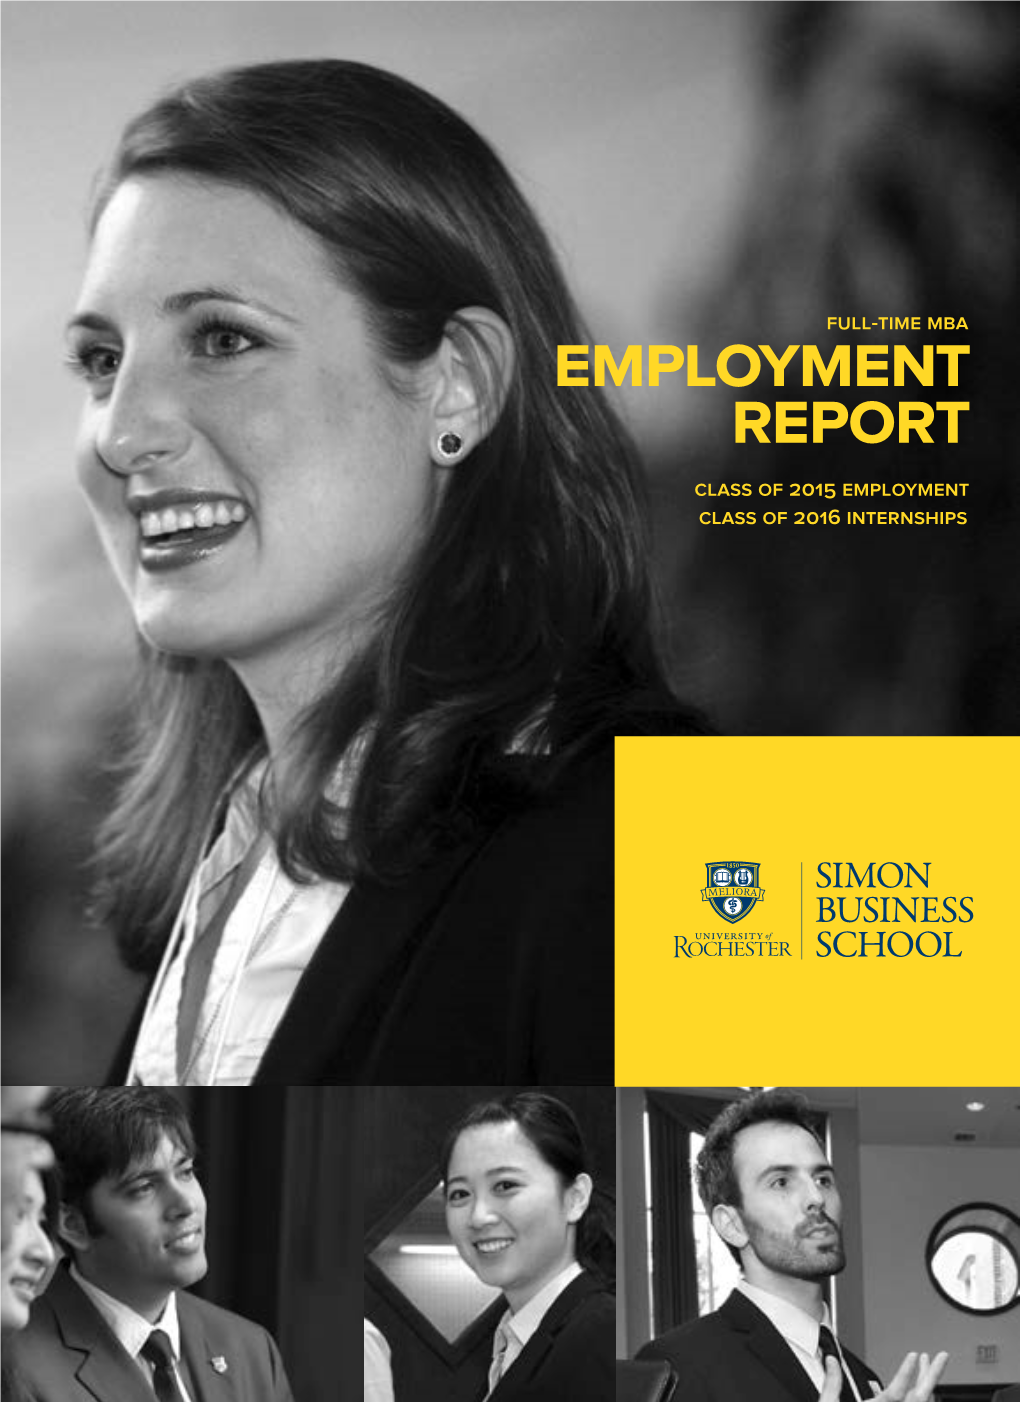 Employment Report Class of 2015 Employment Class of 2016 Internships Welcome Full-Time MBA Profile and Summary